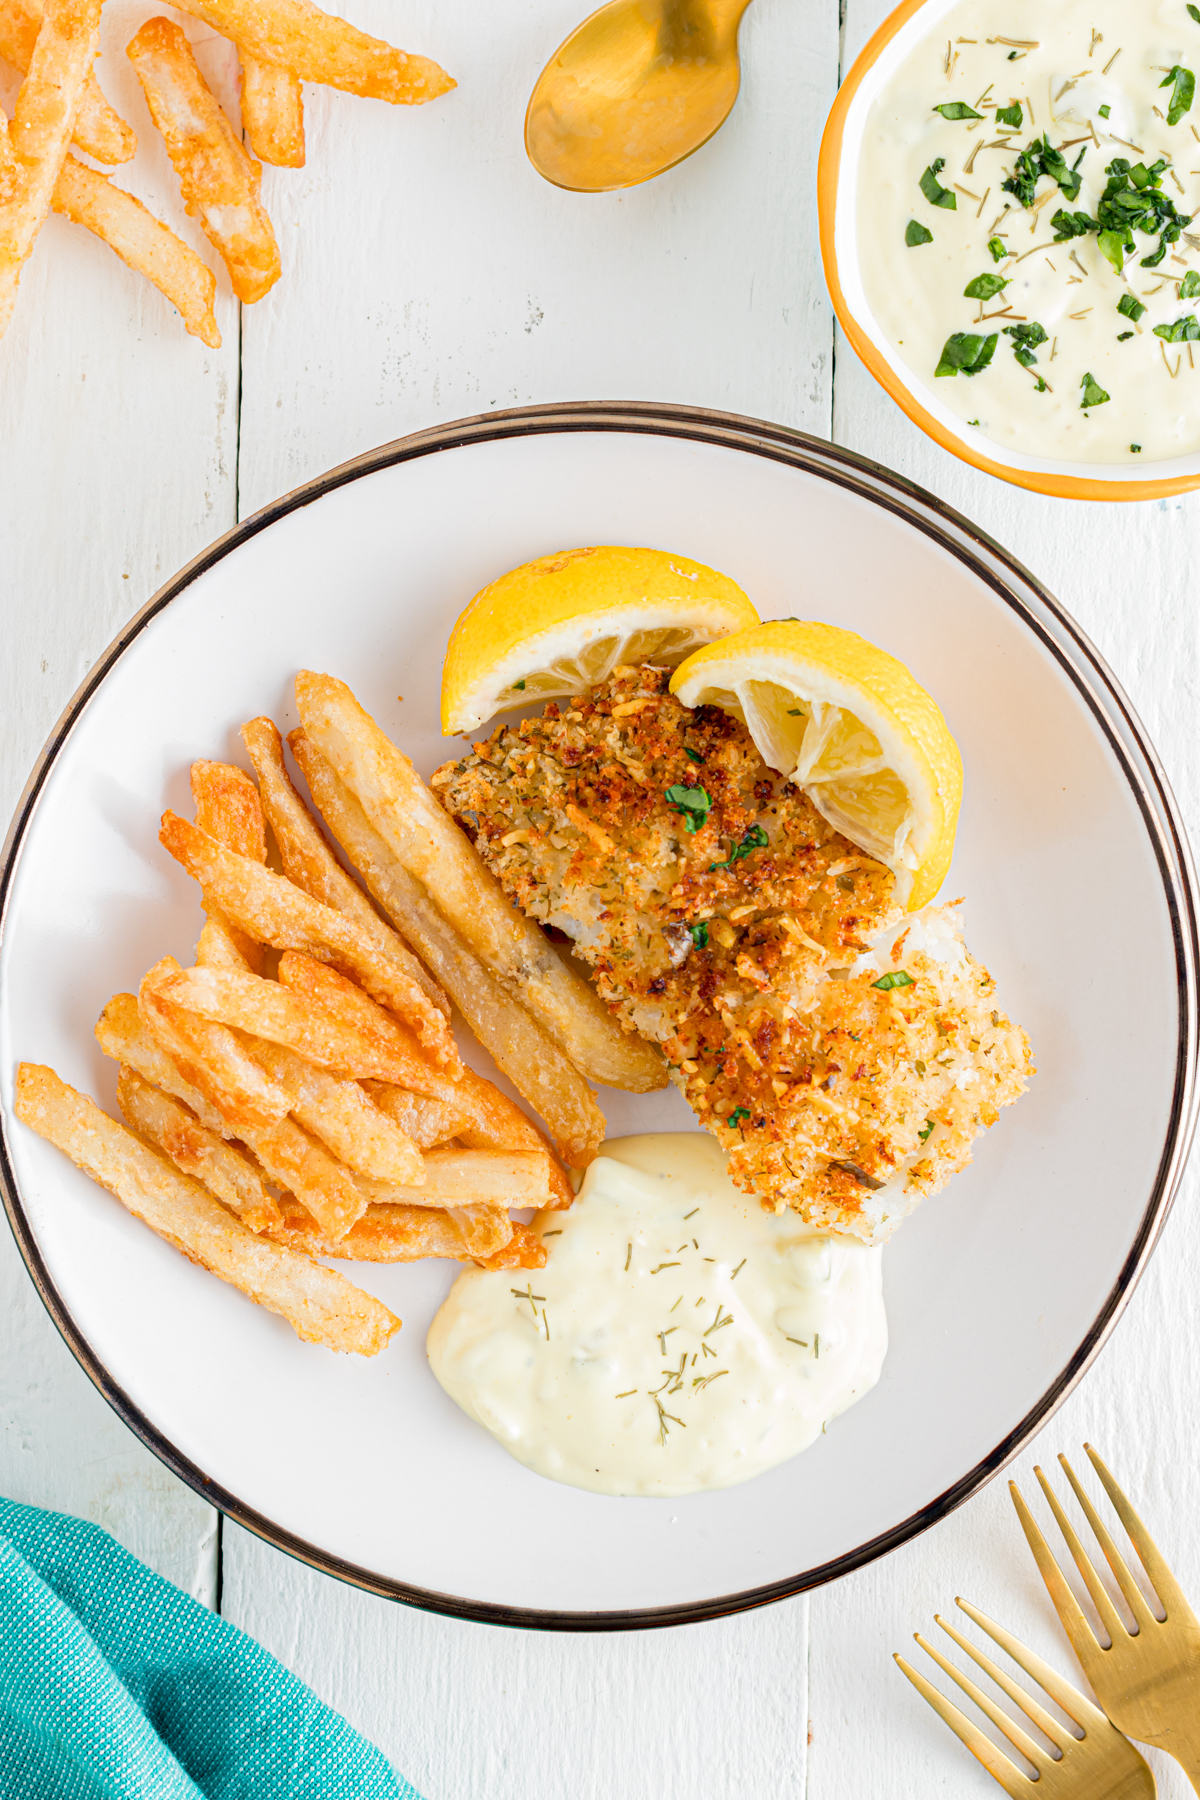 Breaded cod on plate with fries and tartar sauce.